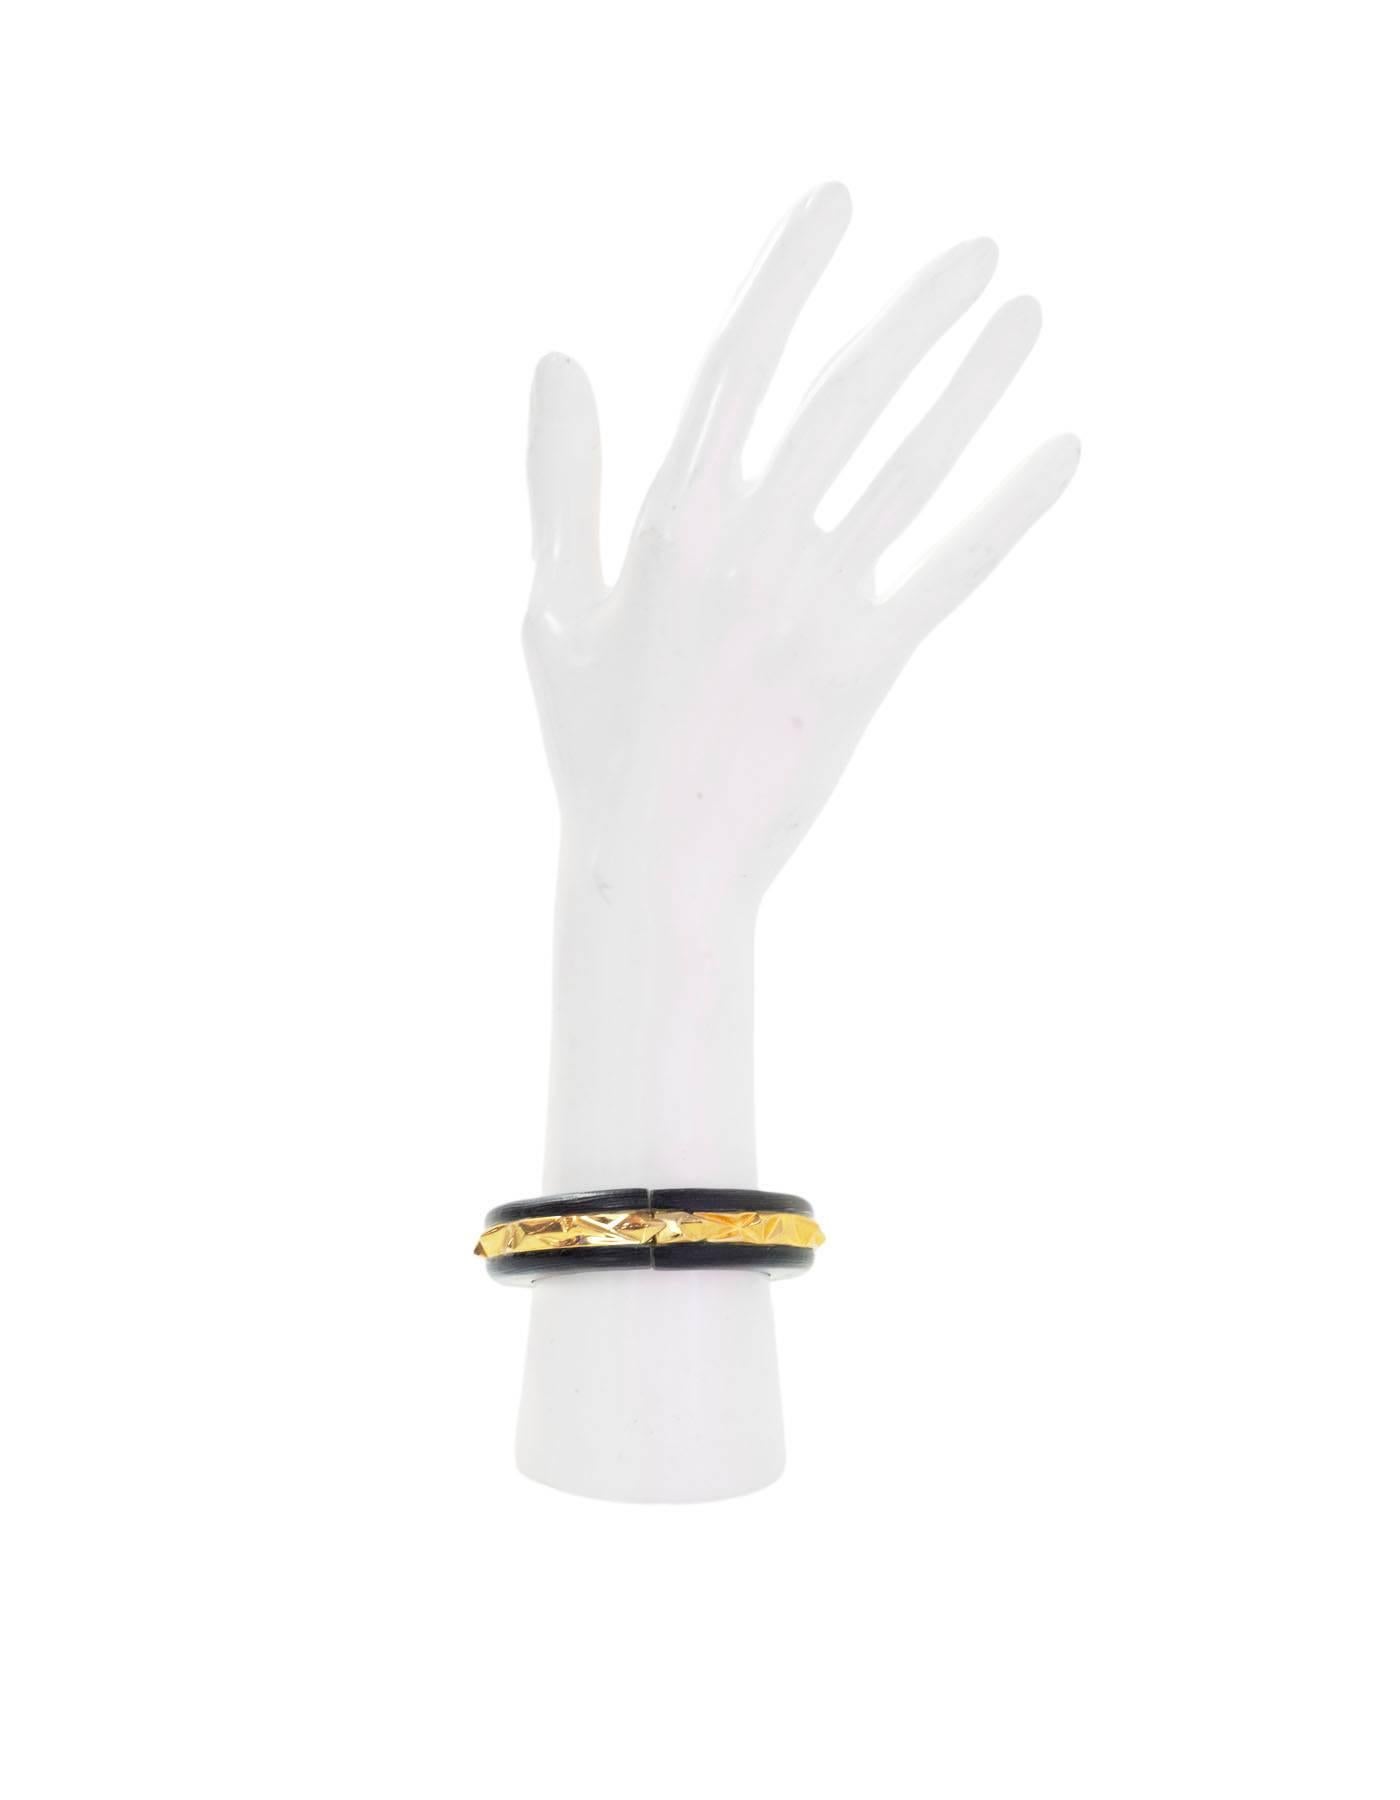 Alexis Bittar Lucite and Goldtone Bangle

Color: Black, gold
Materials: Resin and metal
Closure: Magnetic closure
Stamp: Alexis Bittar
Retail Price: $225 + tax
Overall Condition: Excellent pre-owned condition with the exception of light surface